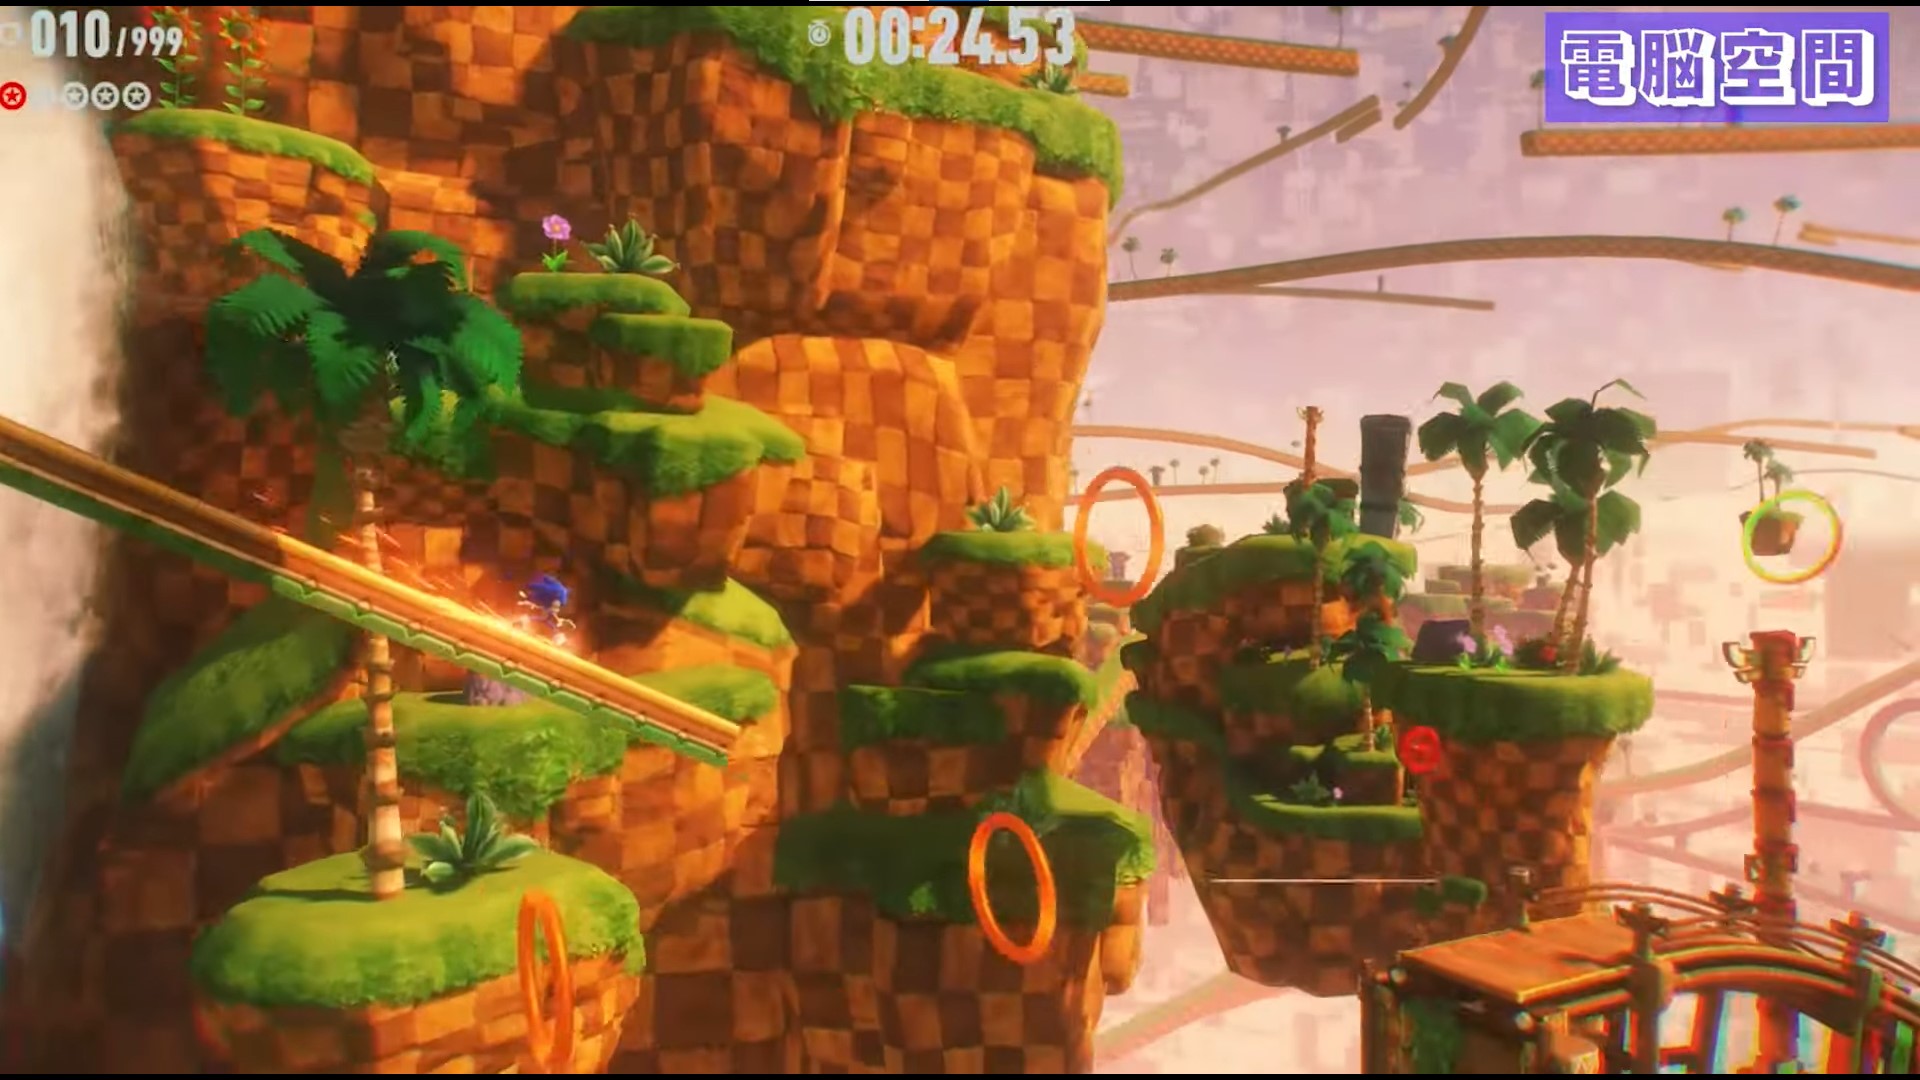 Sonic Frontiers' first gameplay revealed